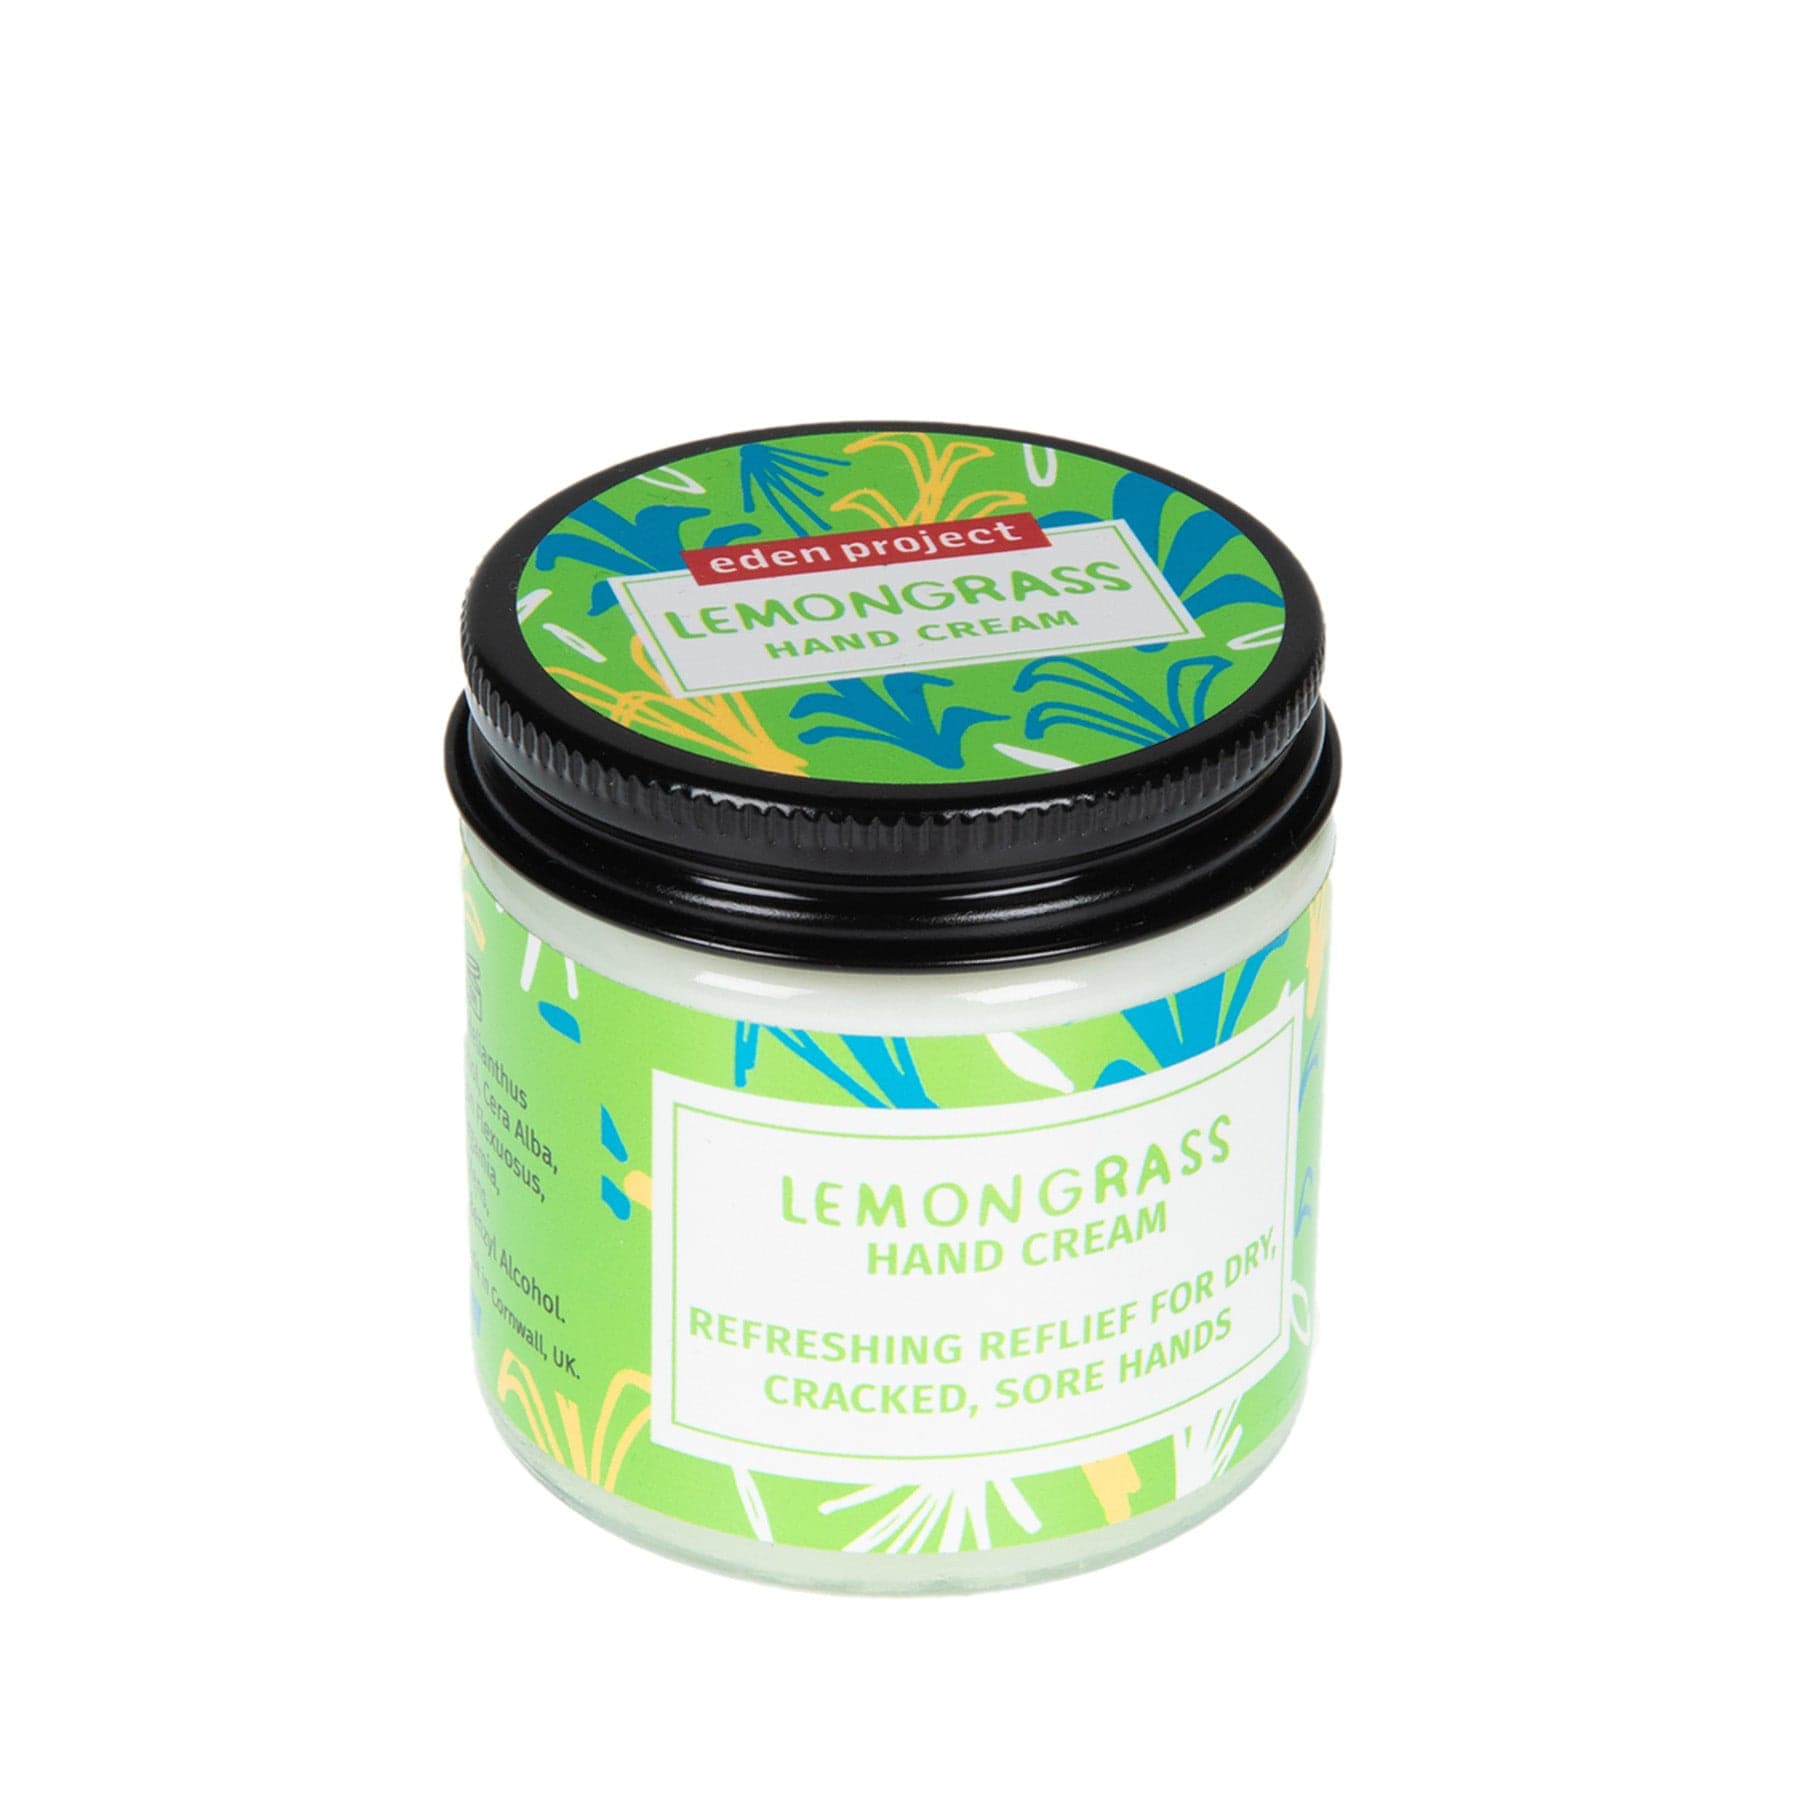 Lemongrass hand cream in a jar with green and tropical pattern label, Eden Project branded skin care product for dry hands.